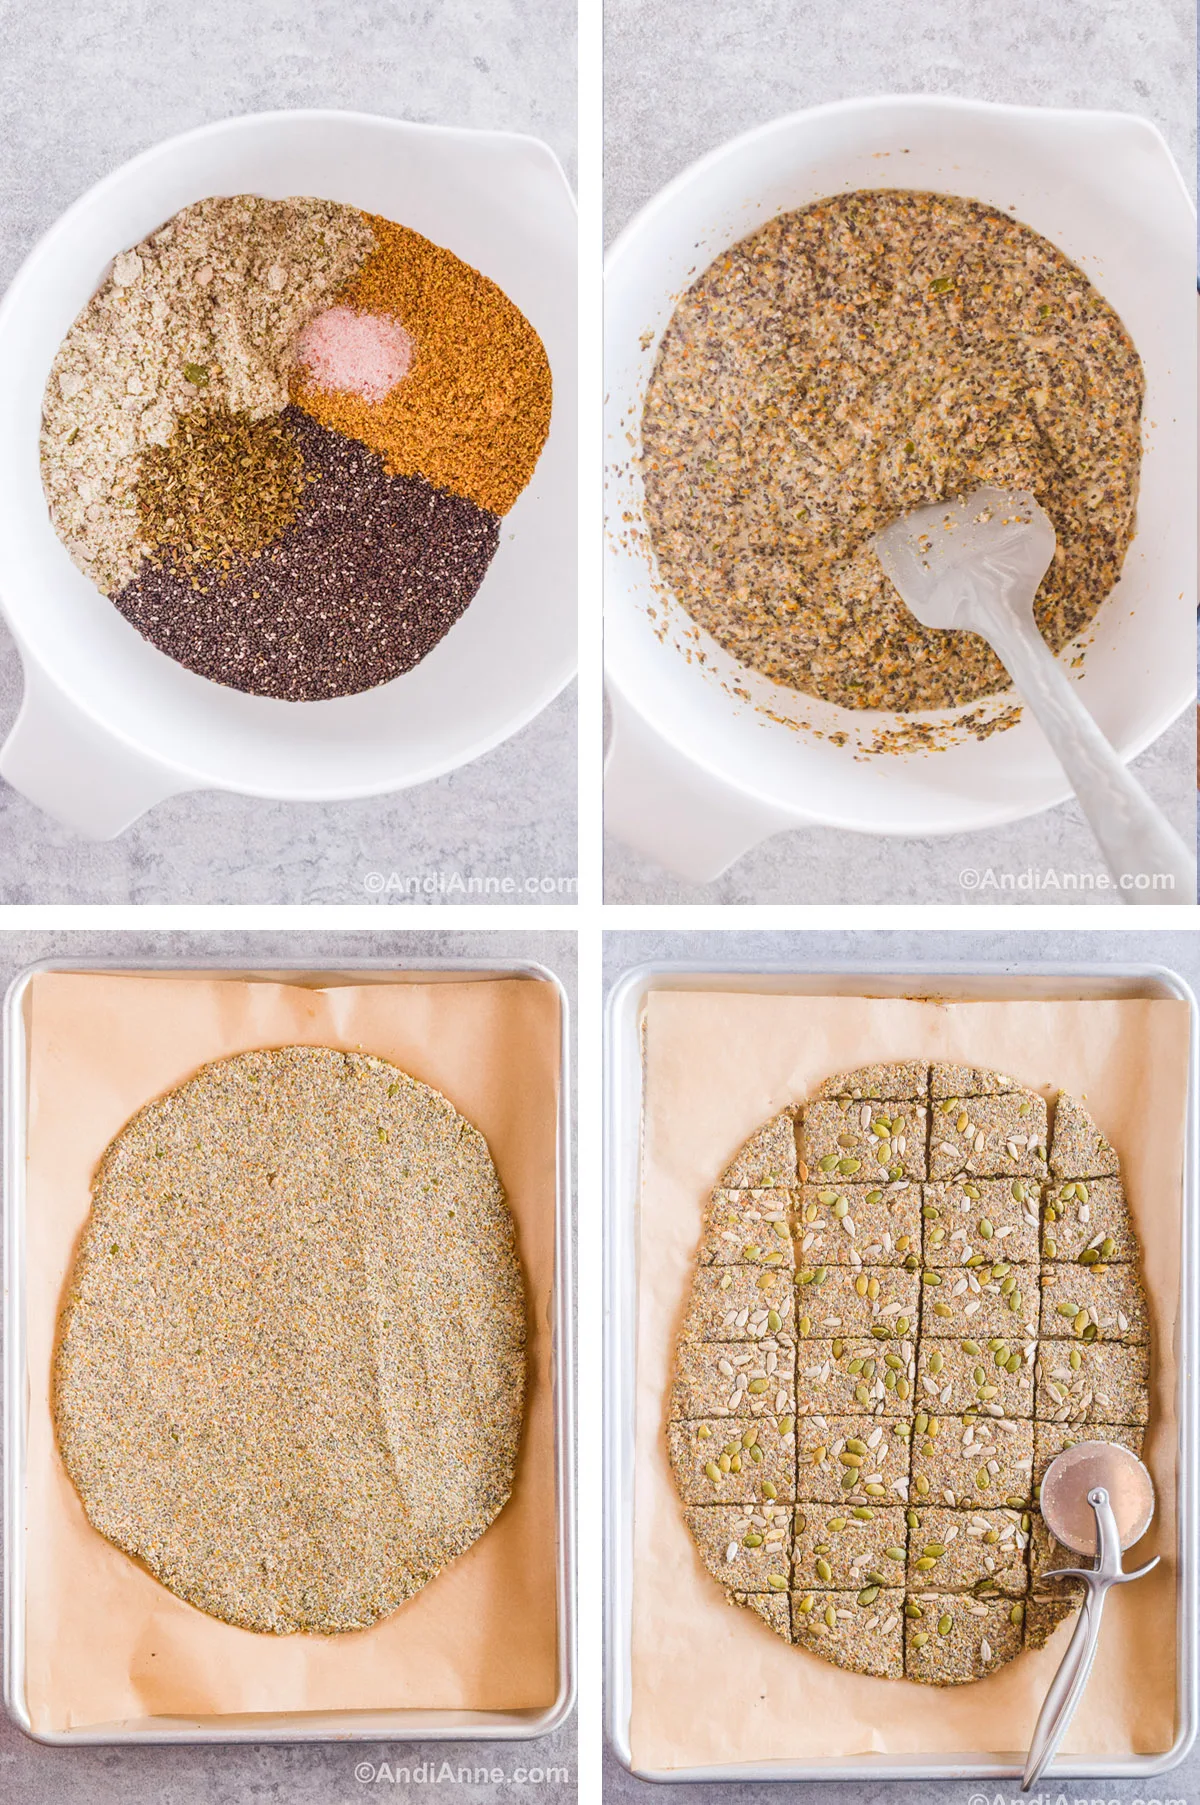 Four images grouped together including a large white bowl with seeds and spices dumped in. Second is white bowl with cracker batter and a silicone spatula. Third is batter smoothed out onto parchment paper on a baking sheet. Fourth is baked crackers sliced into squares on baking sheet with a pizza cutter.